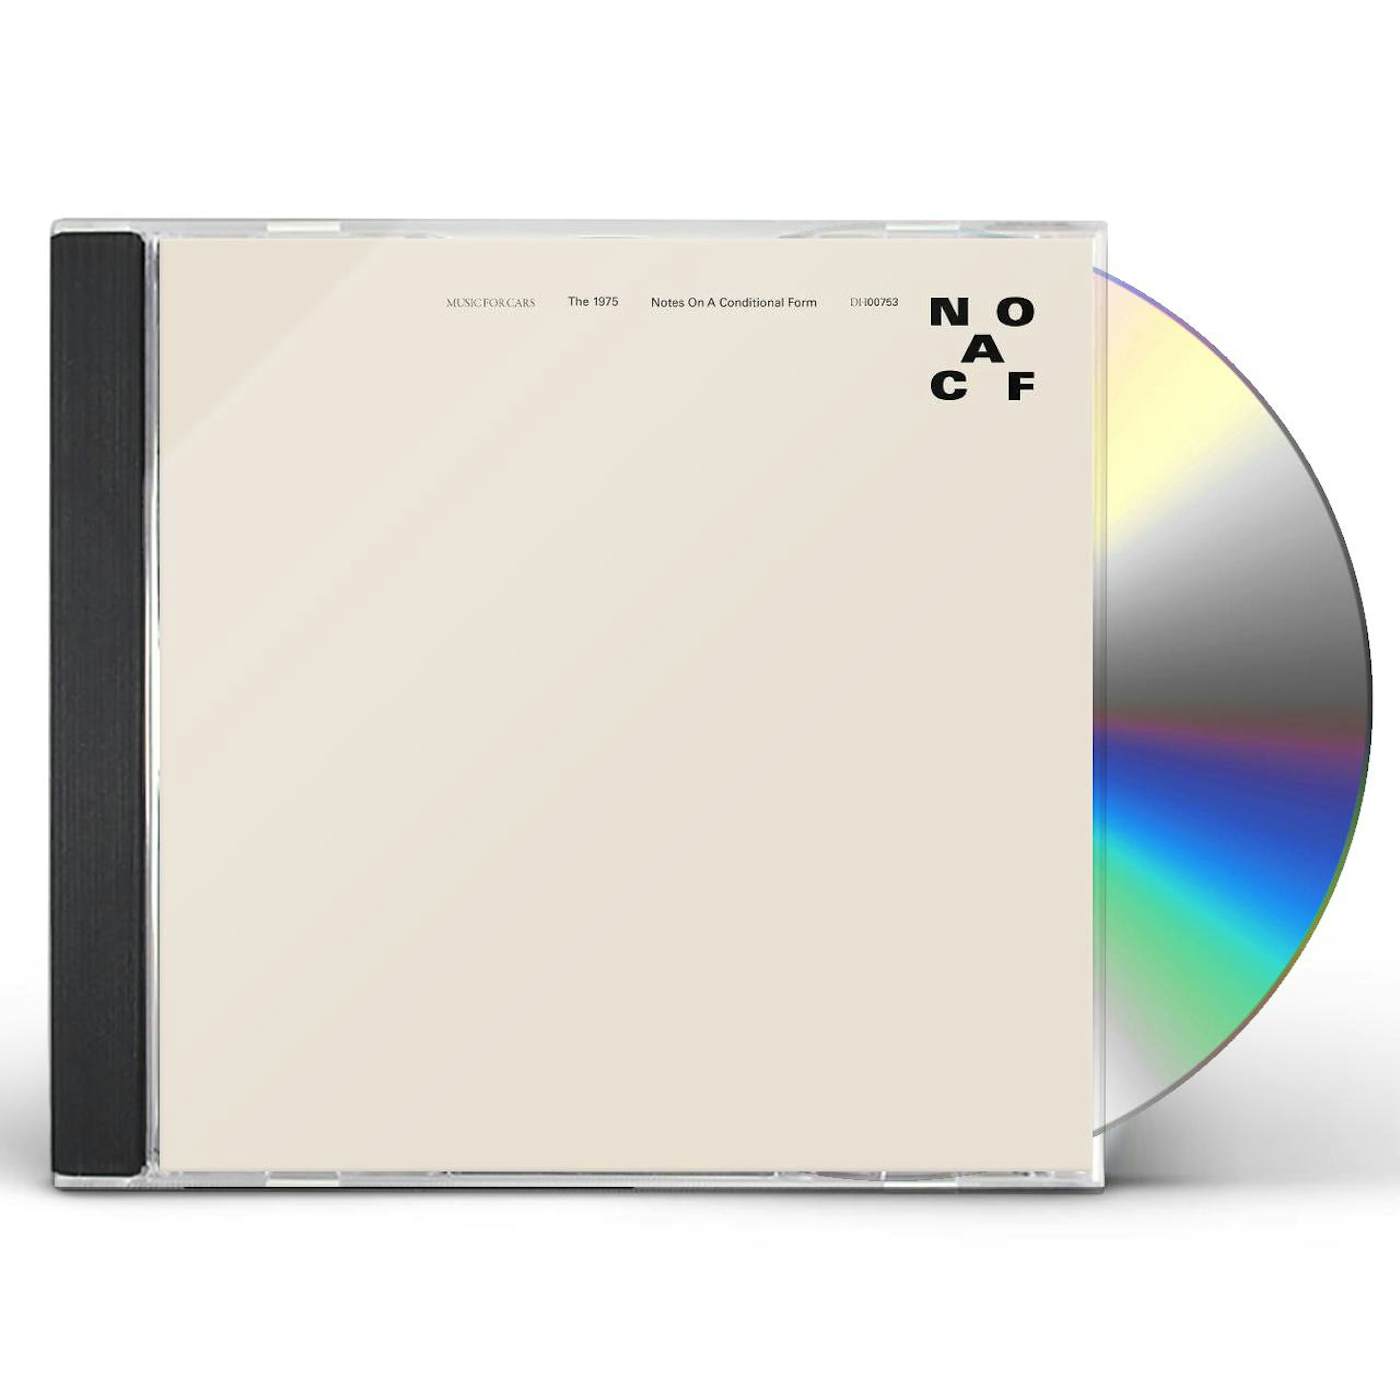 The 1975 NOTES ON A CONDITIONAL FORM CD